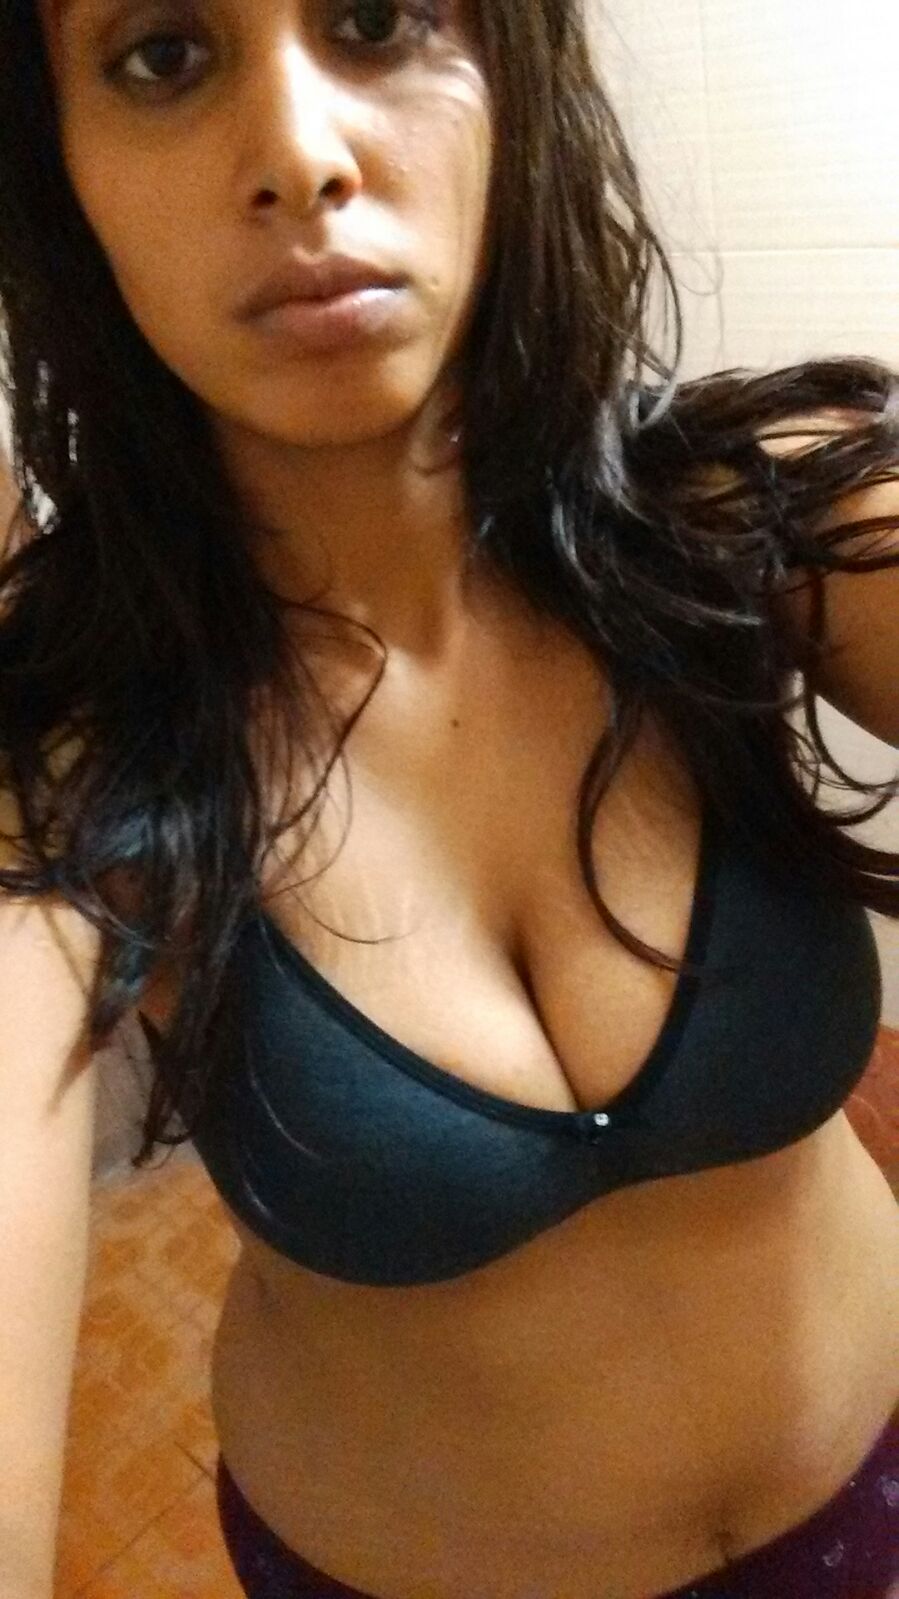 Big Breasted College Girls - Sexy Slim Indian College Girl Nude Big Boobs XXX Photos